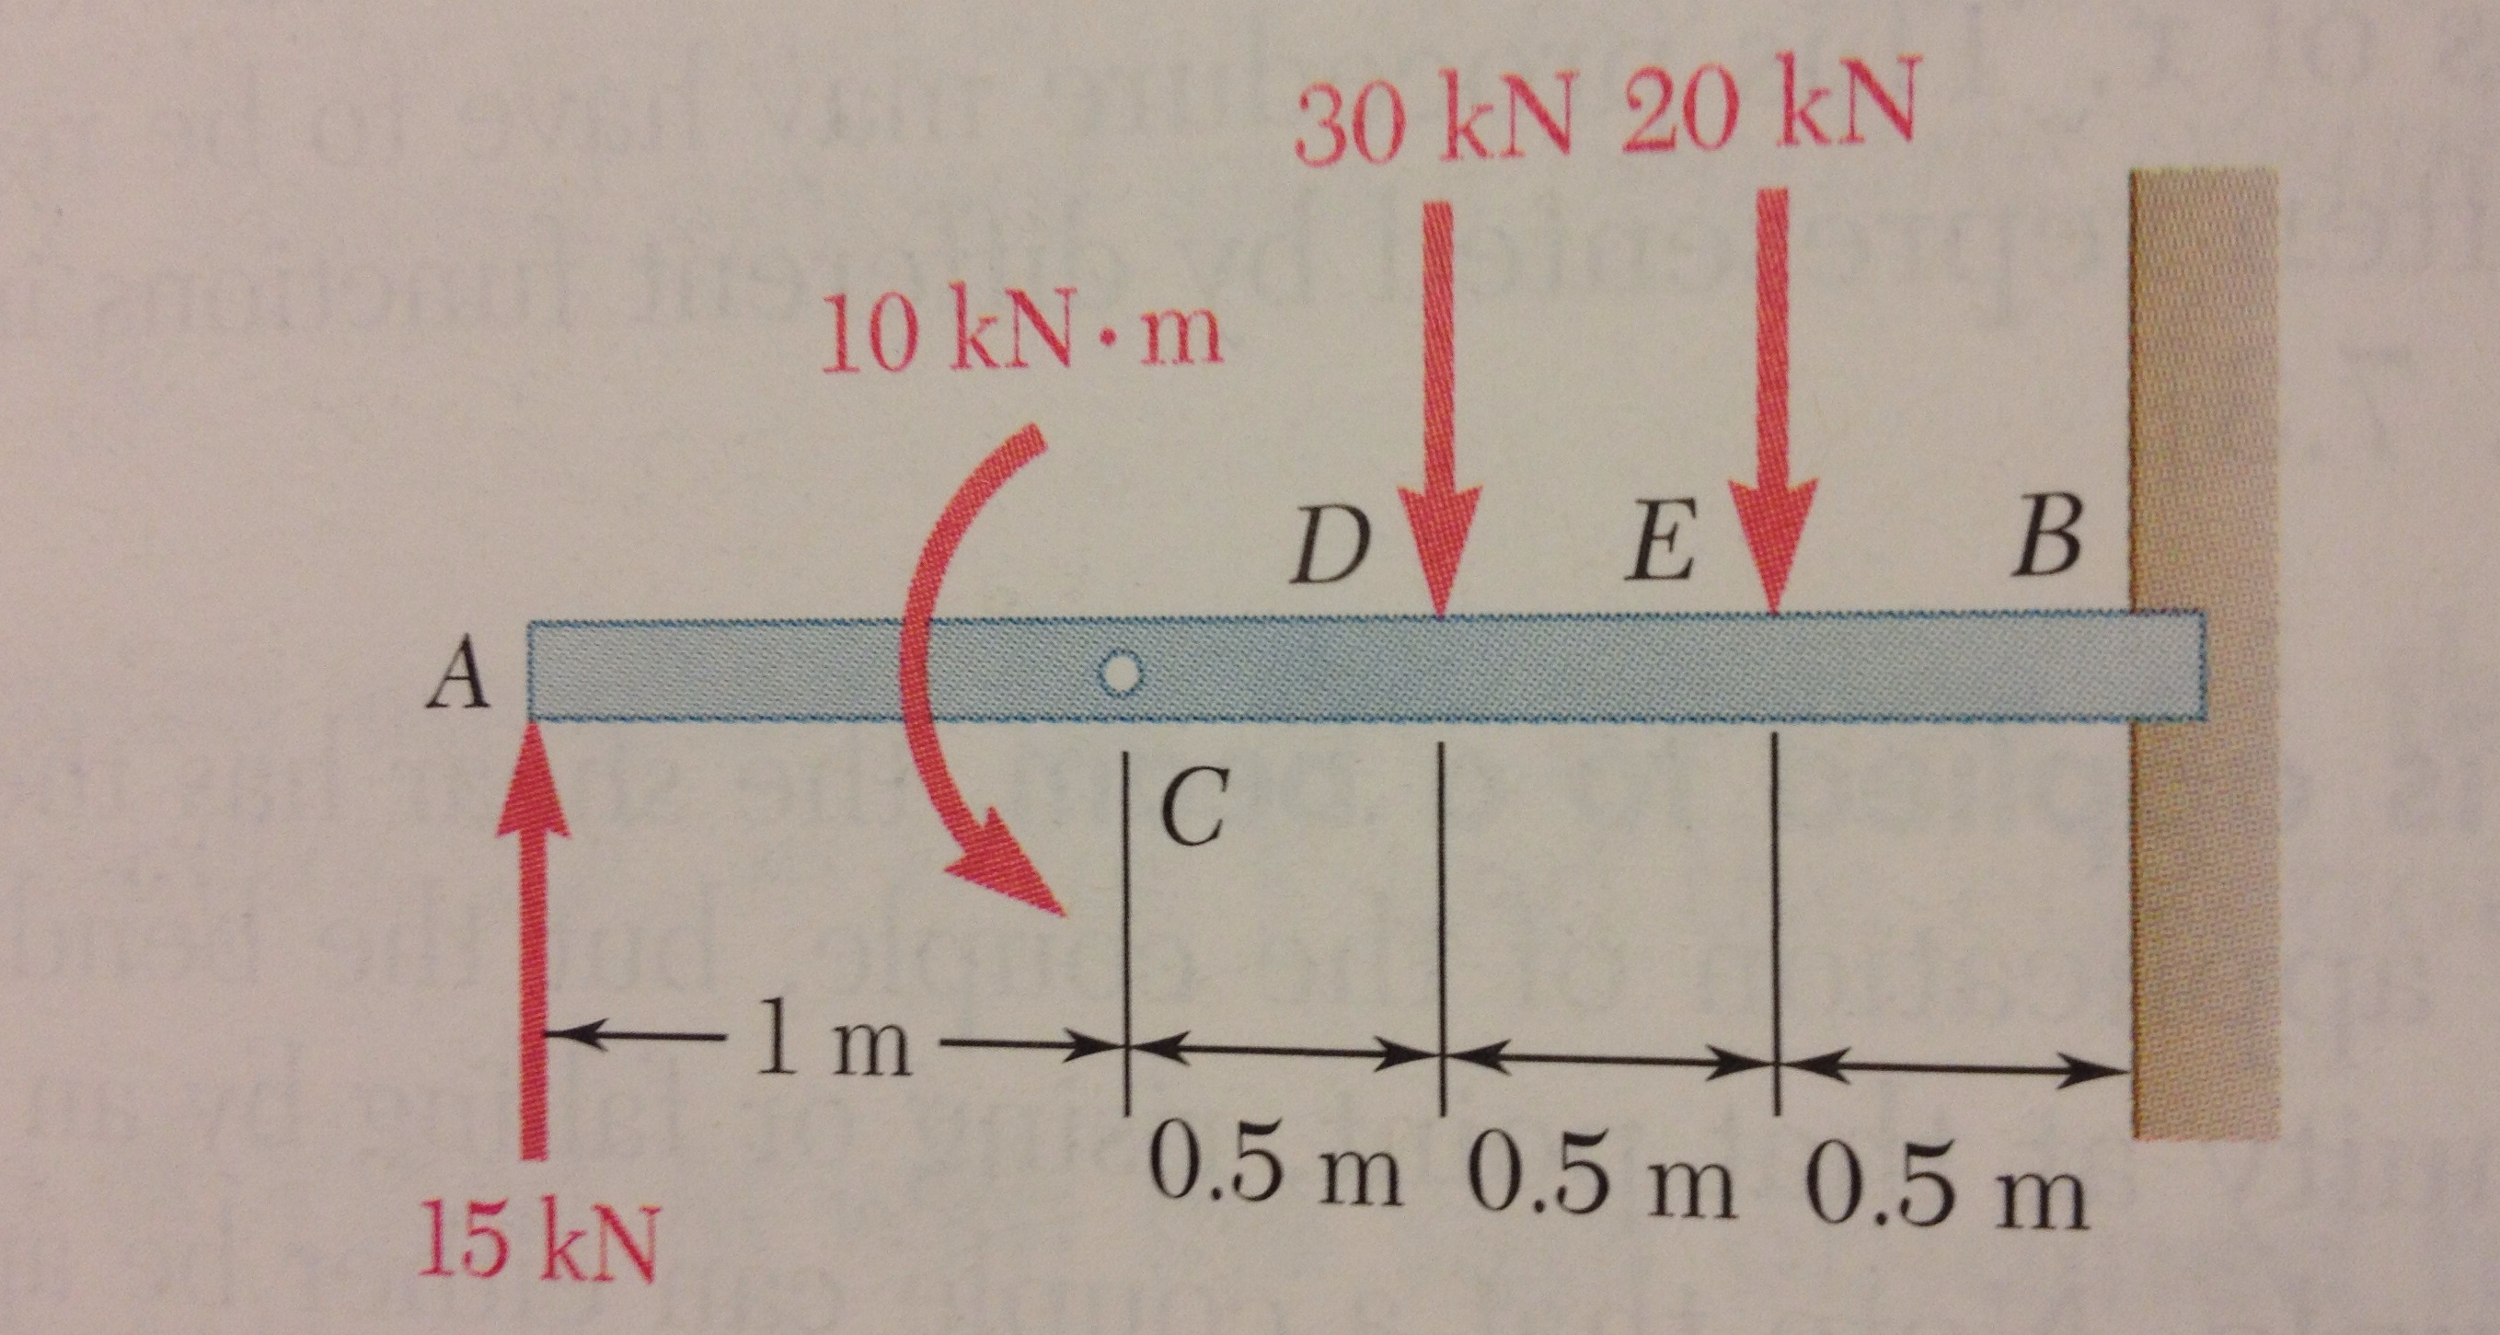 draw the shear and moment diagrams for the beam